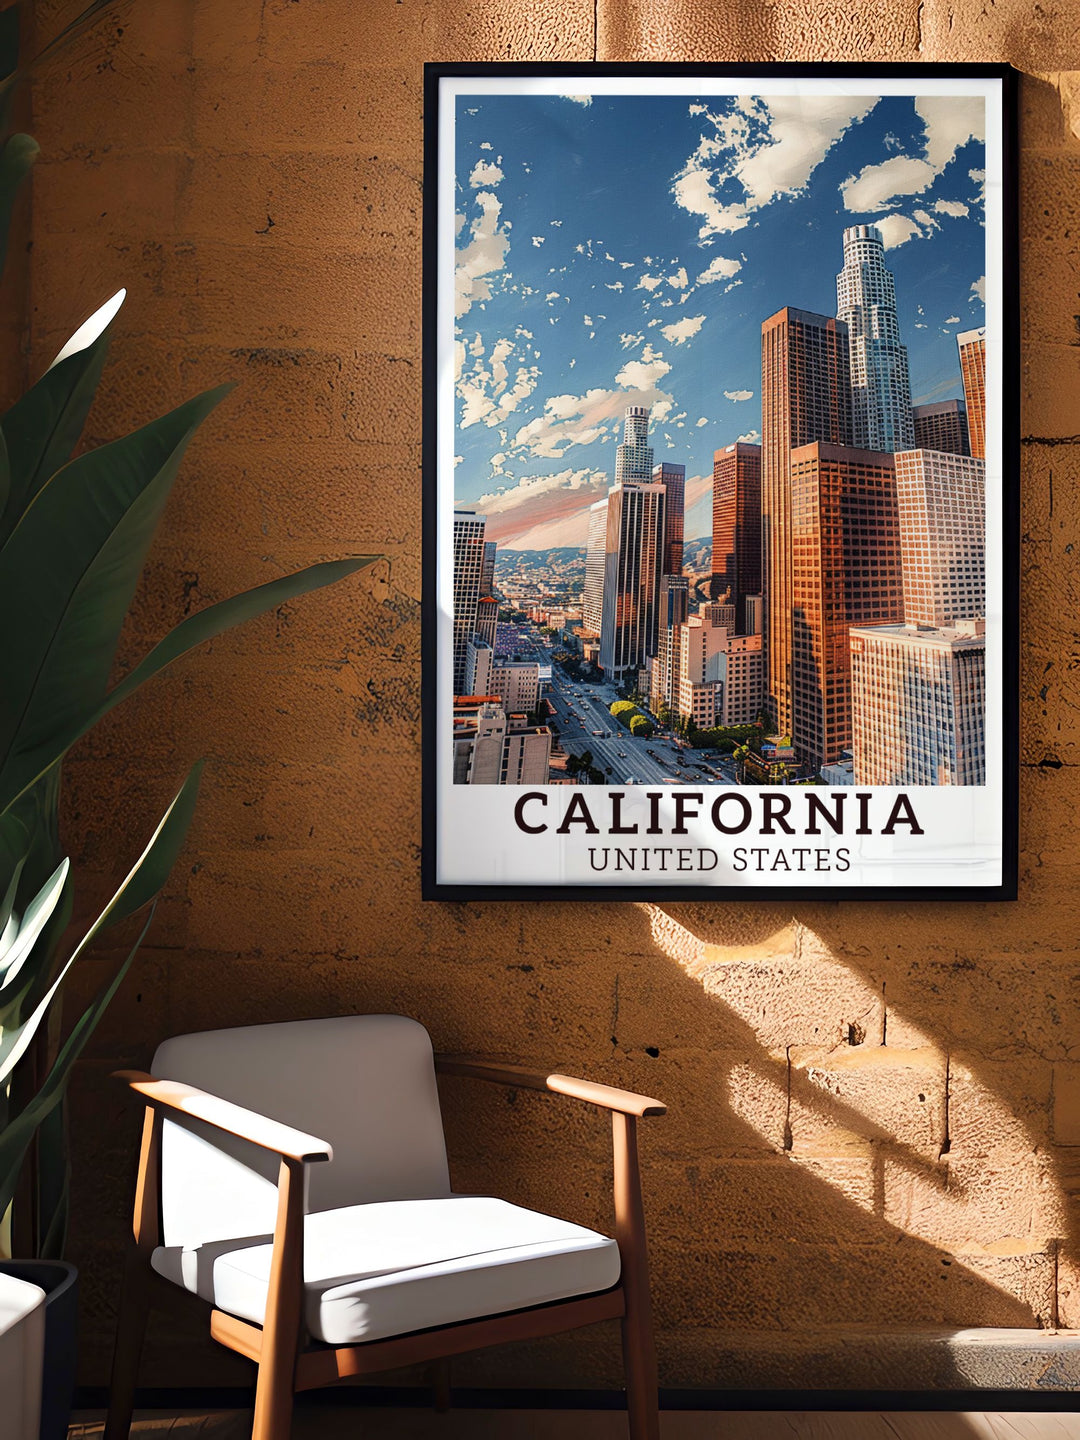 Los Angeles vintage print featuring the iconic skyline and dynamic cityscape of Californias famous city perfect for adding a touch of history and charm to your home decor a beautiful piece for any travel art collection